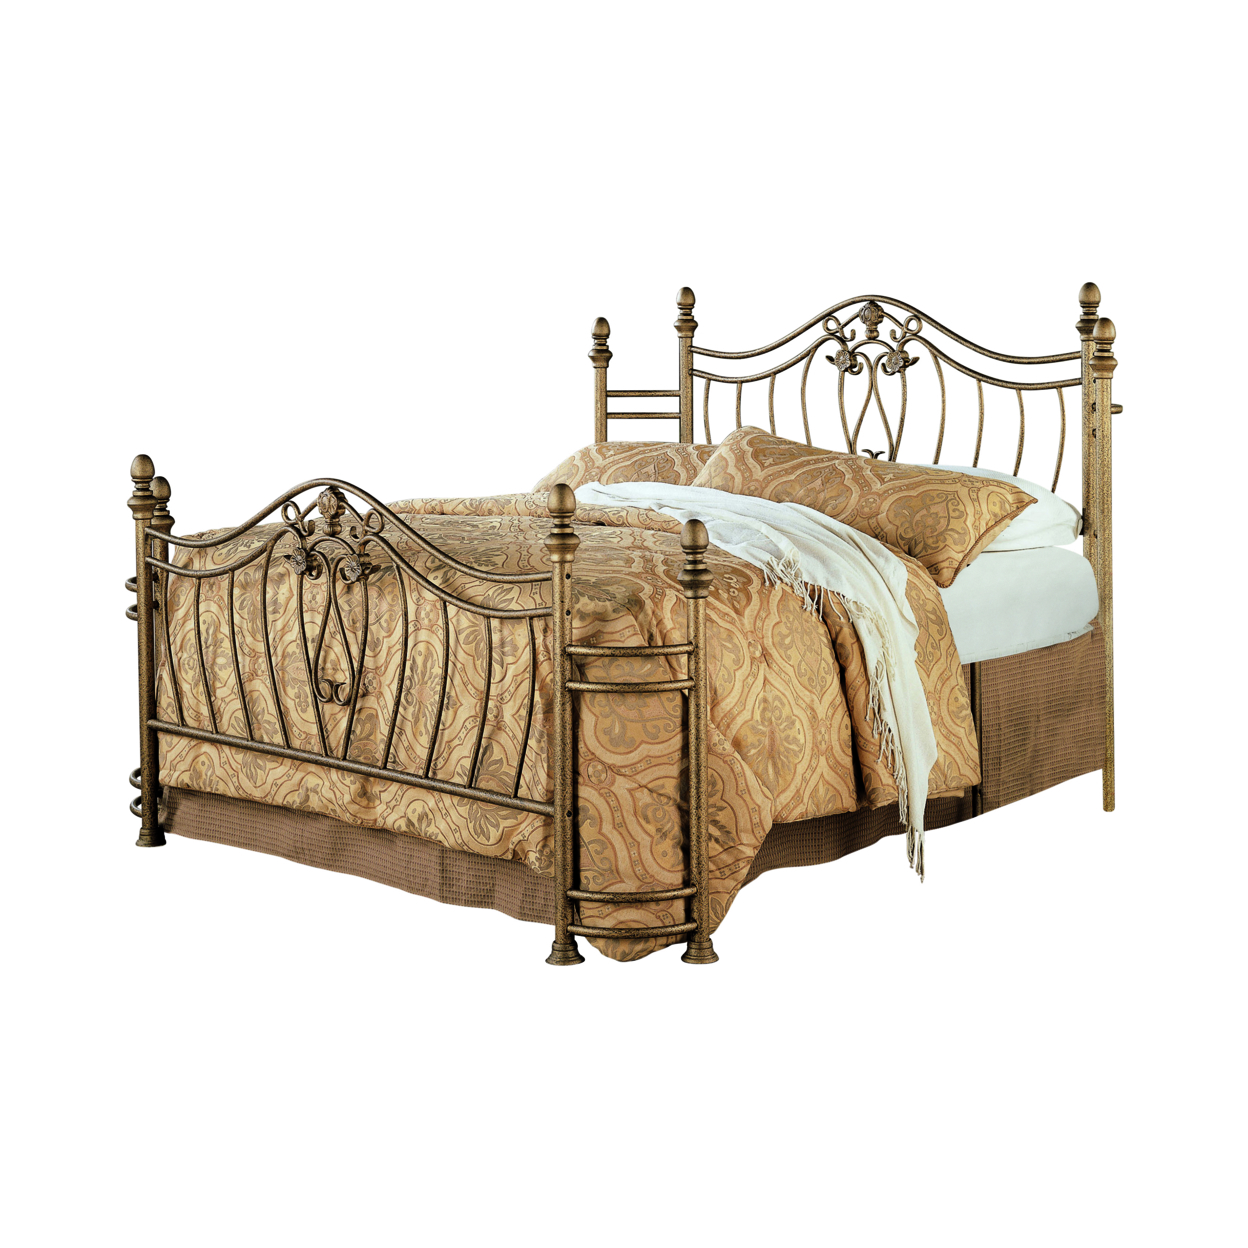 Metal Queen Headboard And Footboard With Swirling Floral Motifs, Antique Gold- Saltoro Sherpi